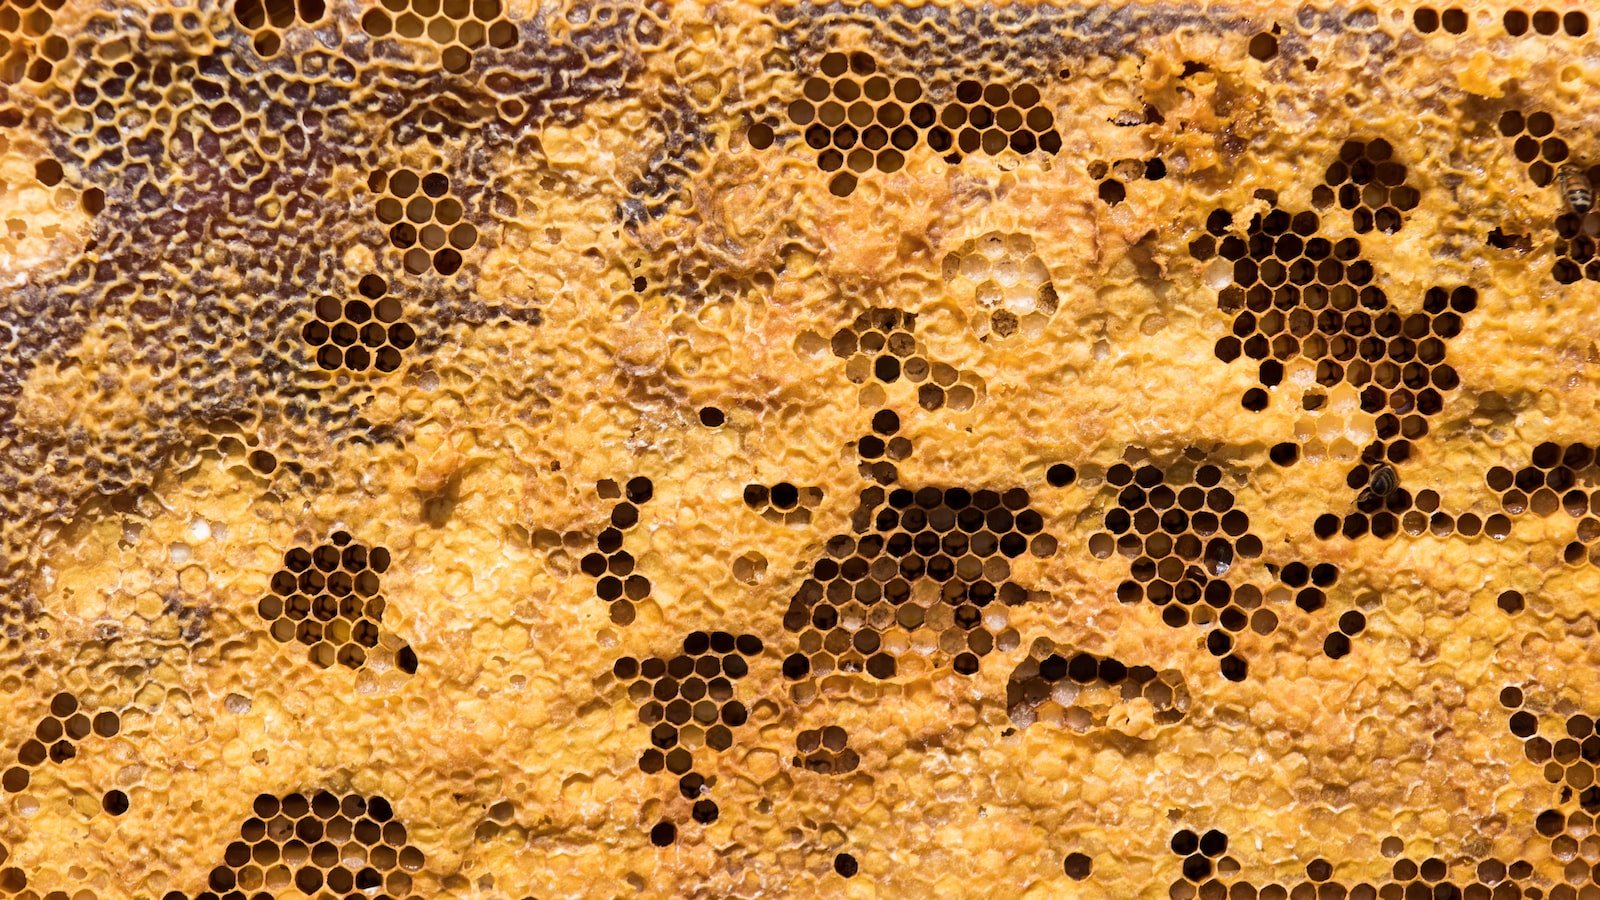 How to Keep Your Hive Clean: A Checklist